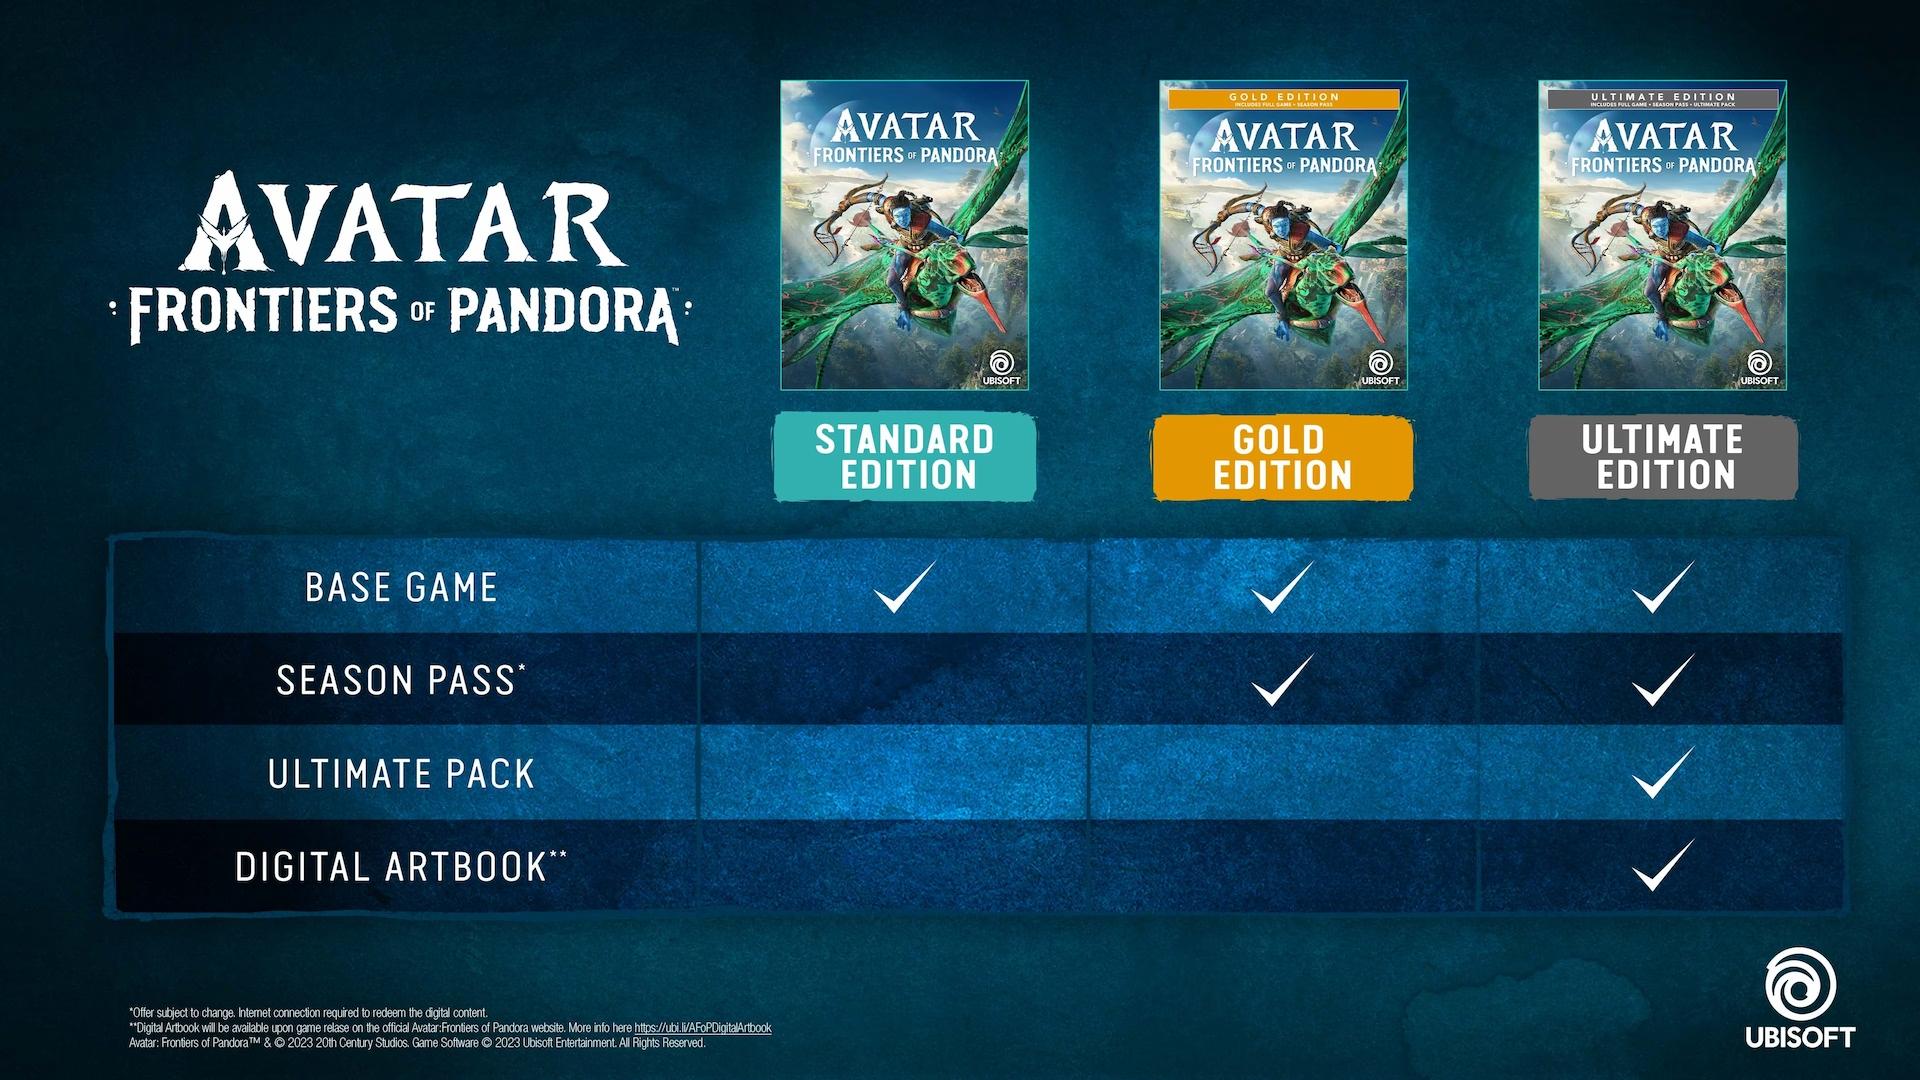 Avatar Frontiers of Pandora collector's editions